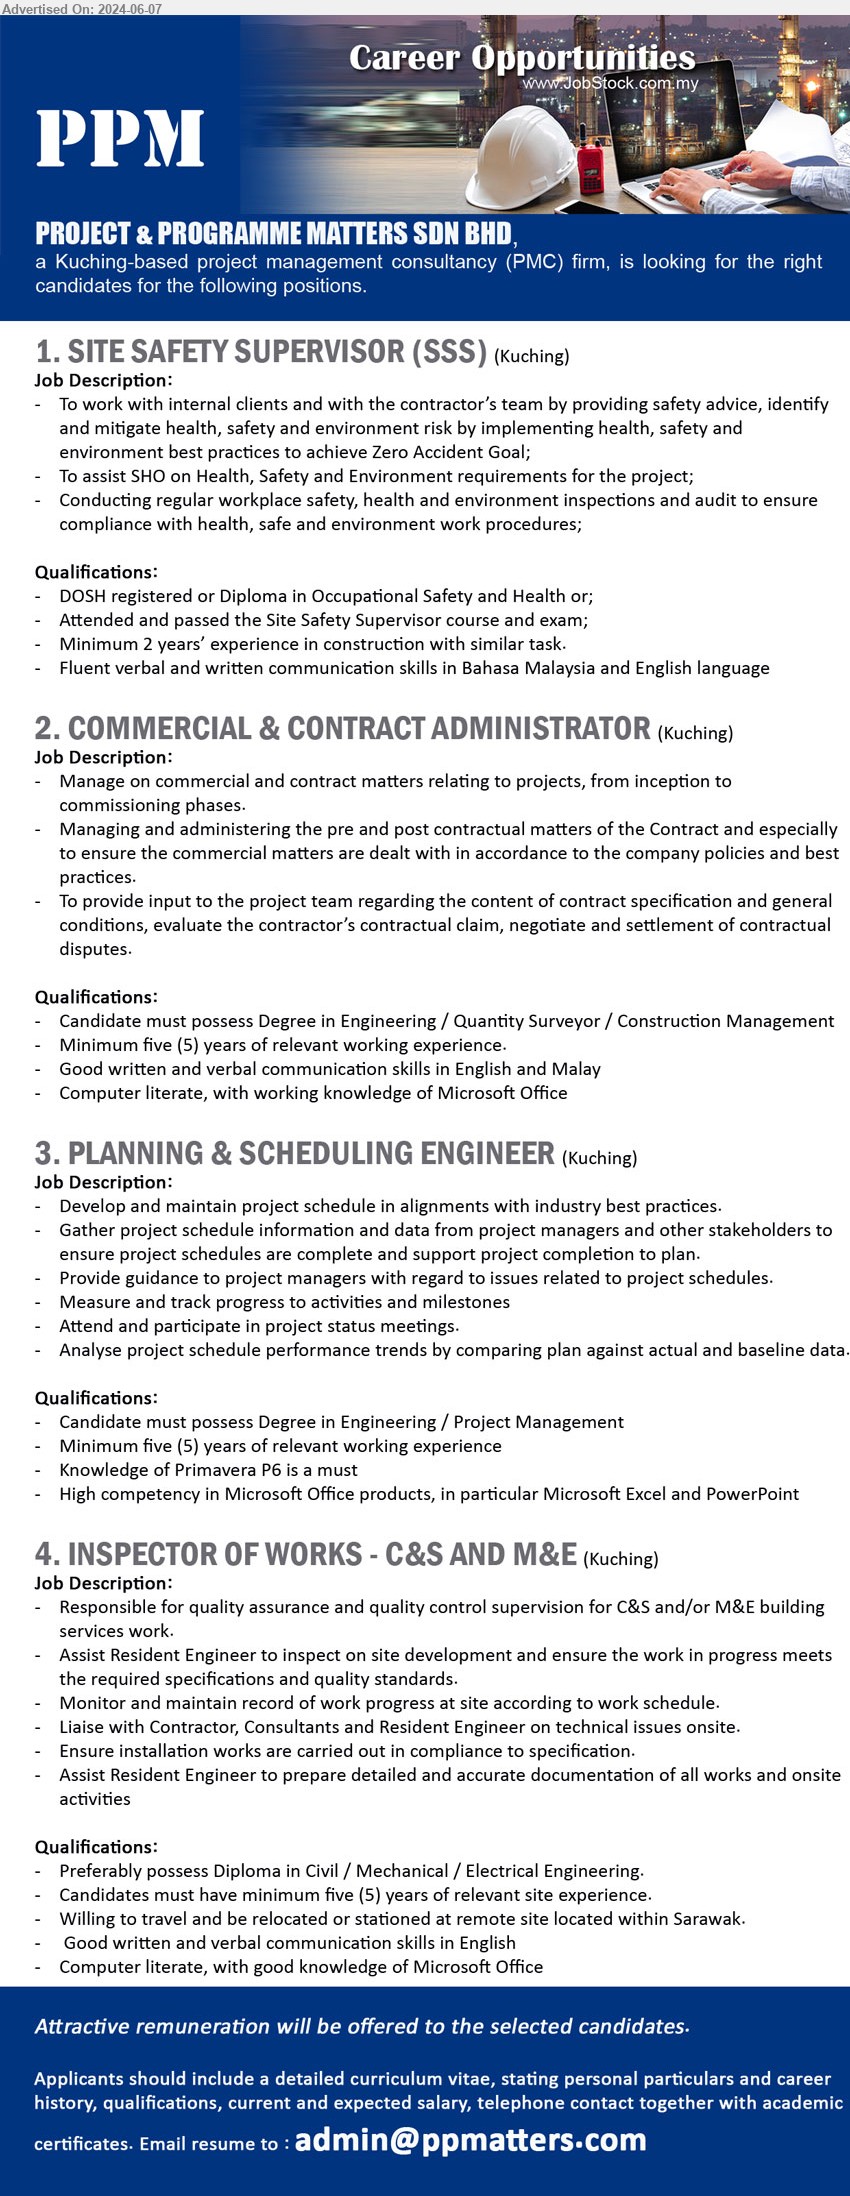 PROJECT & PROGRAMME MATTERS SDN BHD - 1. SITE SAFETY SUPERVISOR (SSS) (Kuching), DOSH registered or Diploma in Occupational Safety and Health,...
2. COMMERCIAL & CONTRACT ADMINISTRATOR (Kuching), Degree in Engineering / Quantity Surveyor / Construction Management,...
3. PLANNING & SCHEDULING ENGINEER (Kuching), Degree in Engineering / Project Management,...
4. INSPECTOR OF WORKS - C&S AND M&E (Kuching), Diploma in Civil / Mechanical / Electrical Engineering,...
Email resume to ...